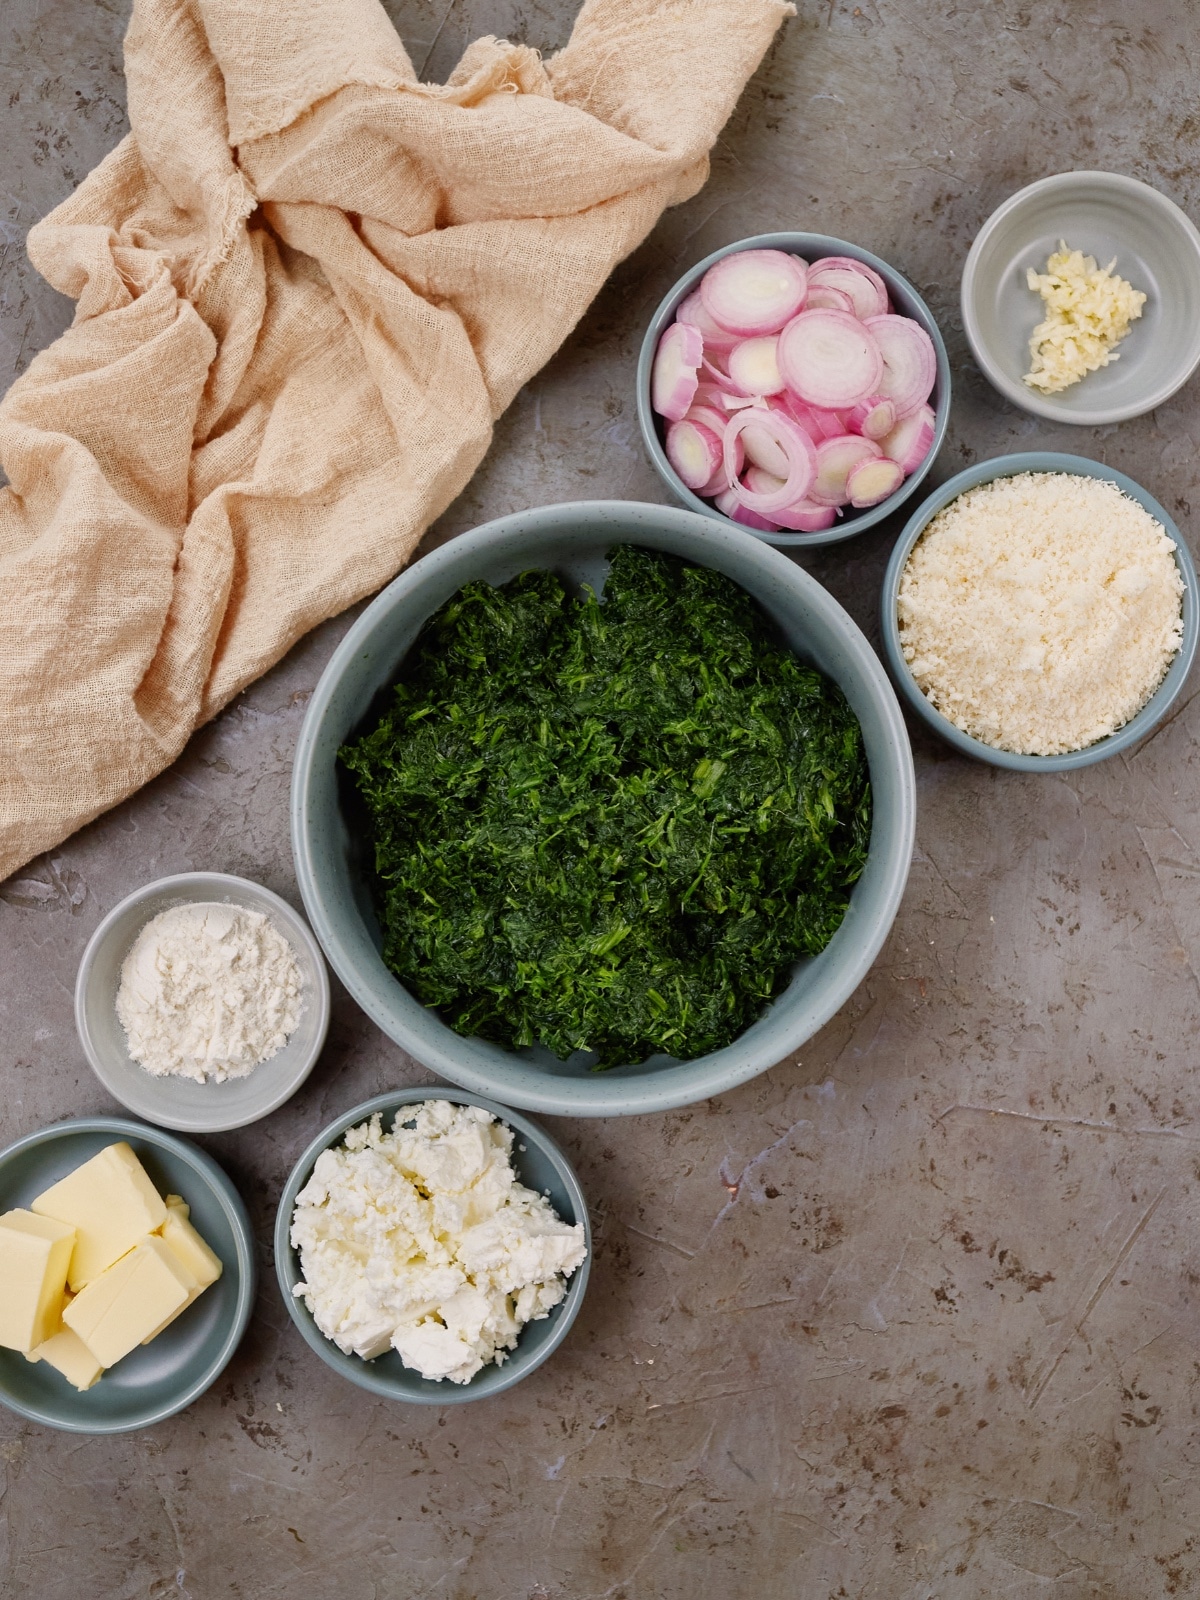 ingredients for spinach casserole in small bowls on a gray background